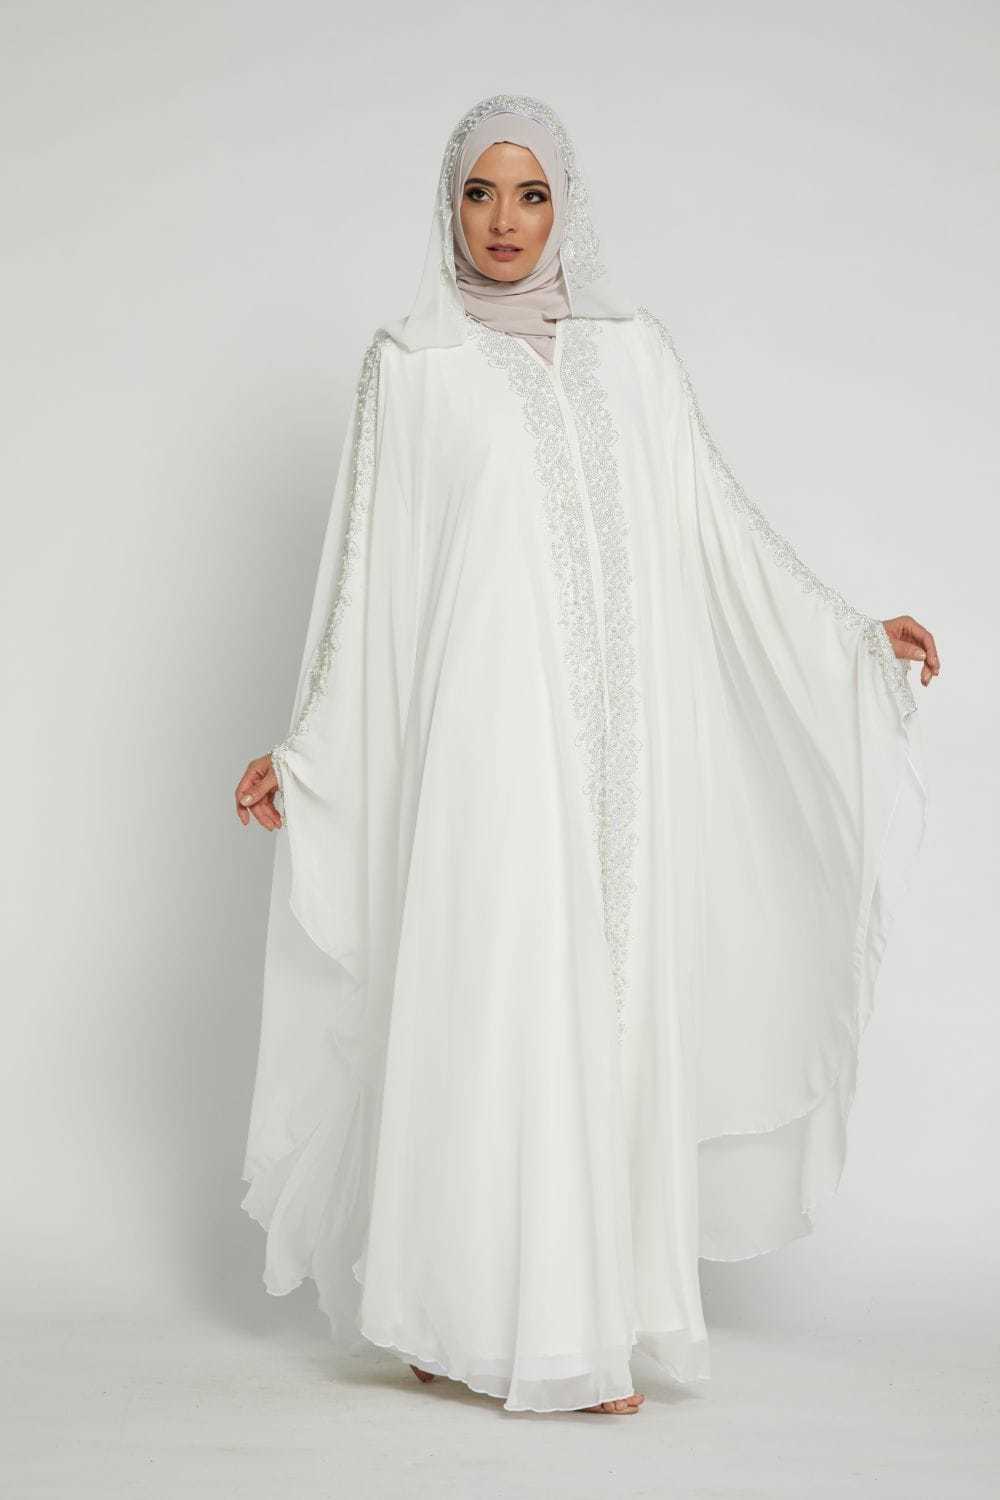 Stay Fashionable with White Abayas Online in Dubai - Shop Today!